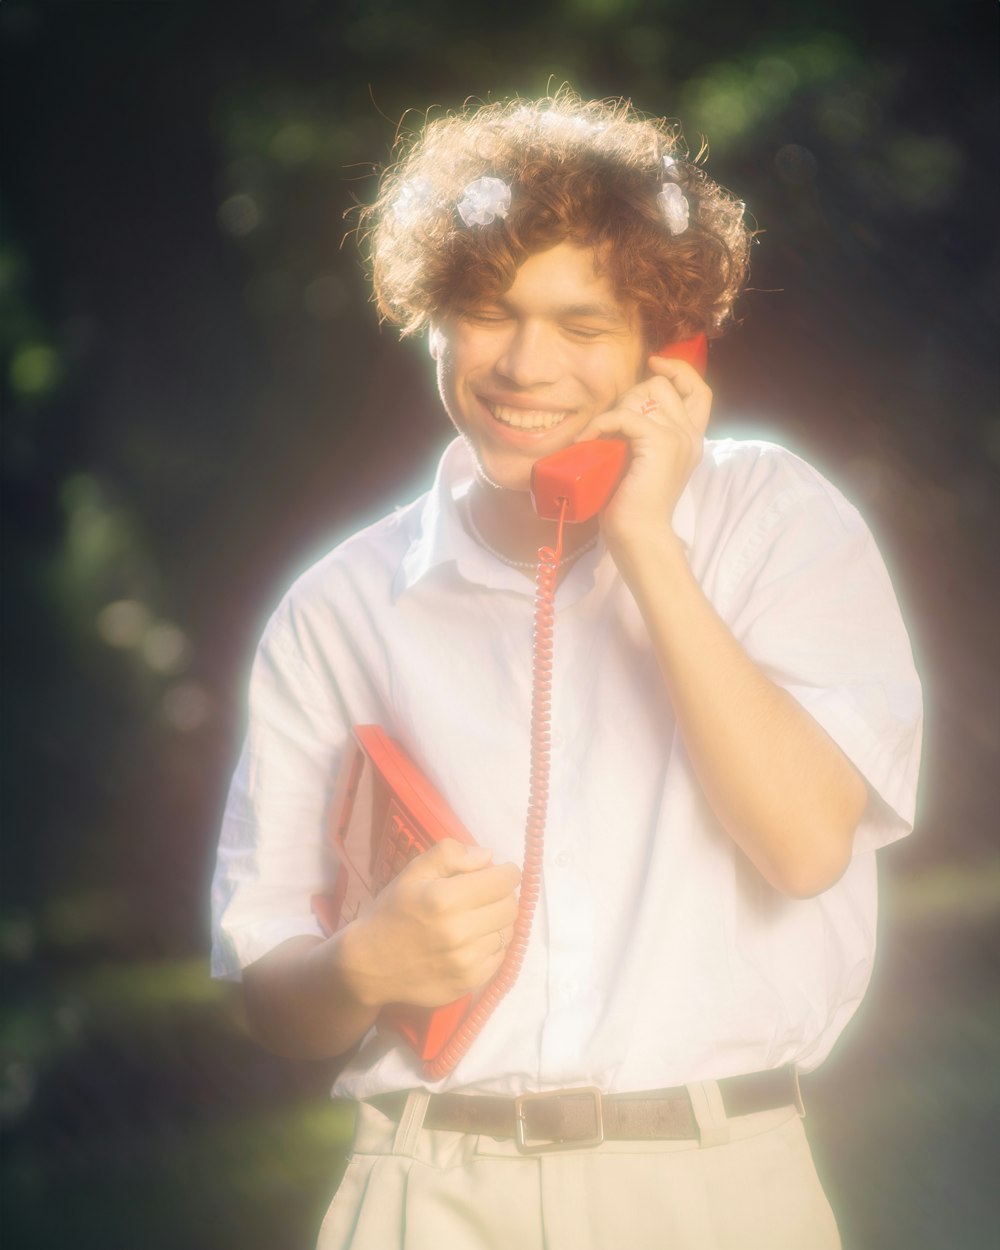 a young man holding a red phone to his ear